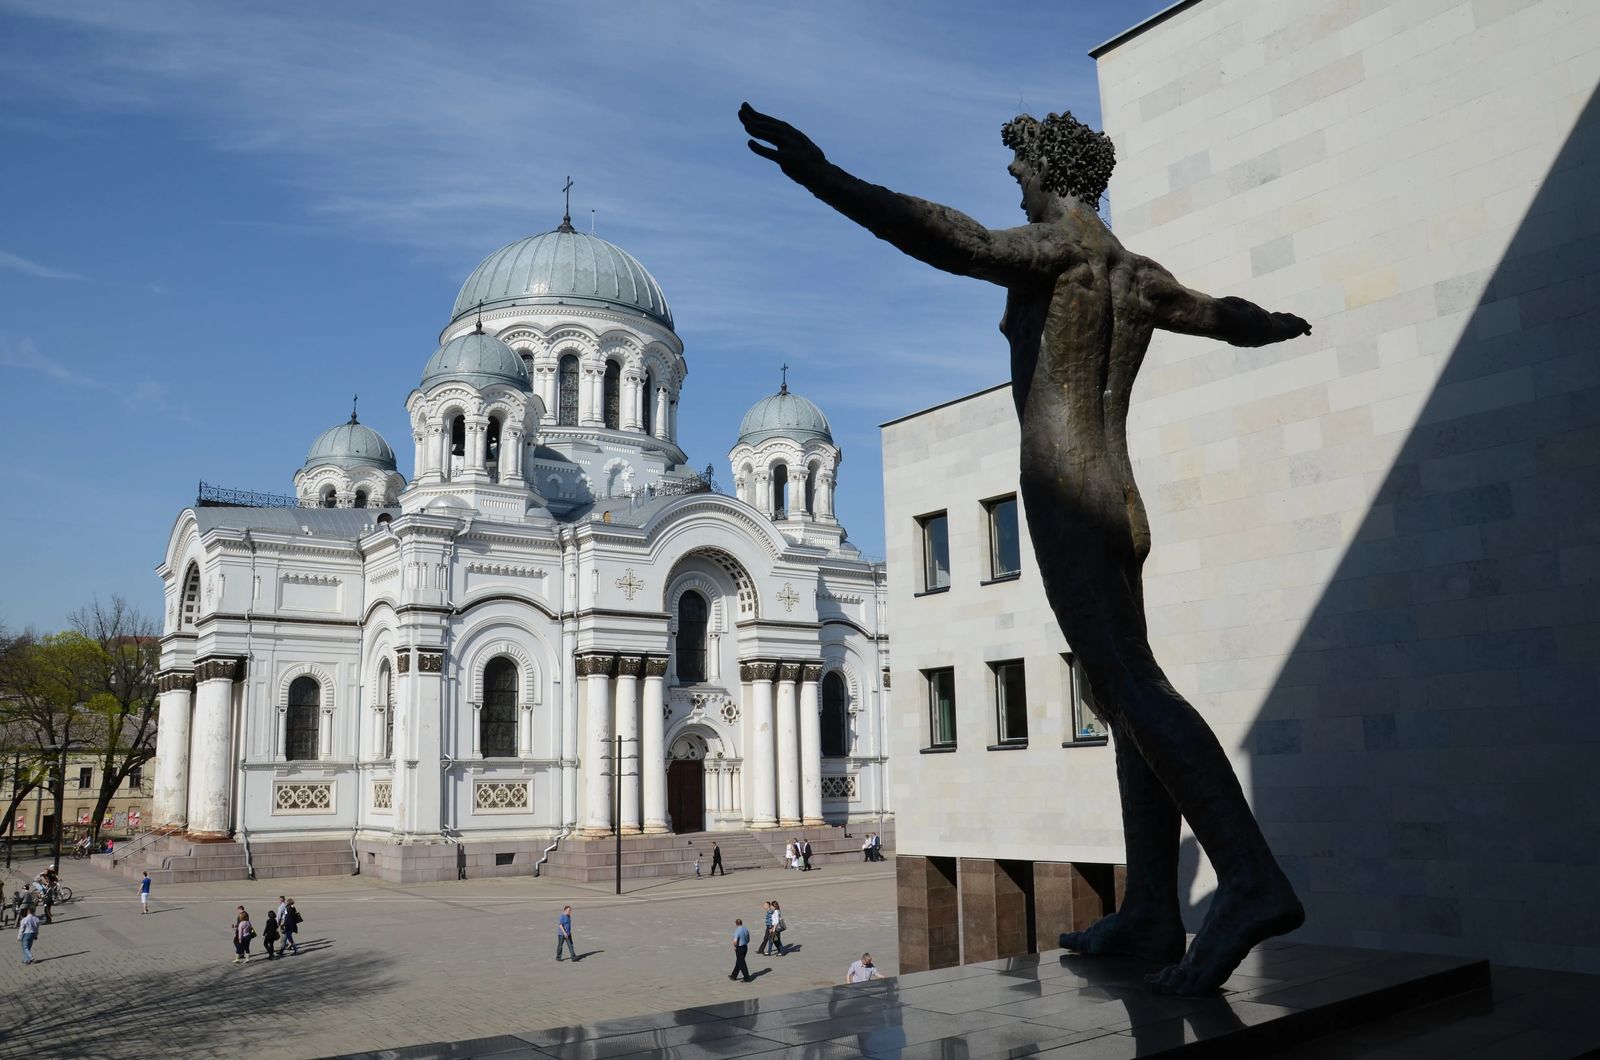 Things to do in Kaunas, statue of man with arms out in front of the church